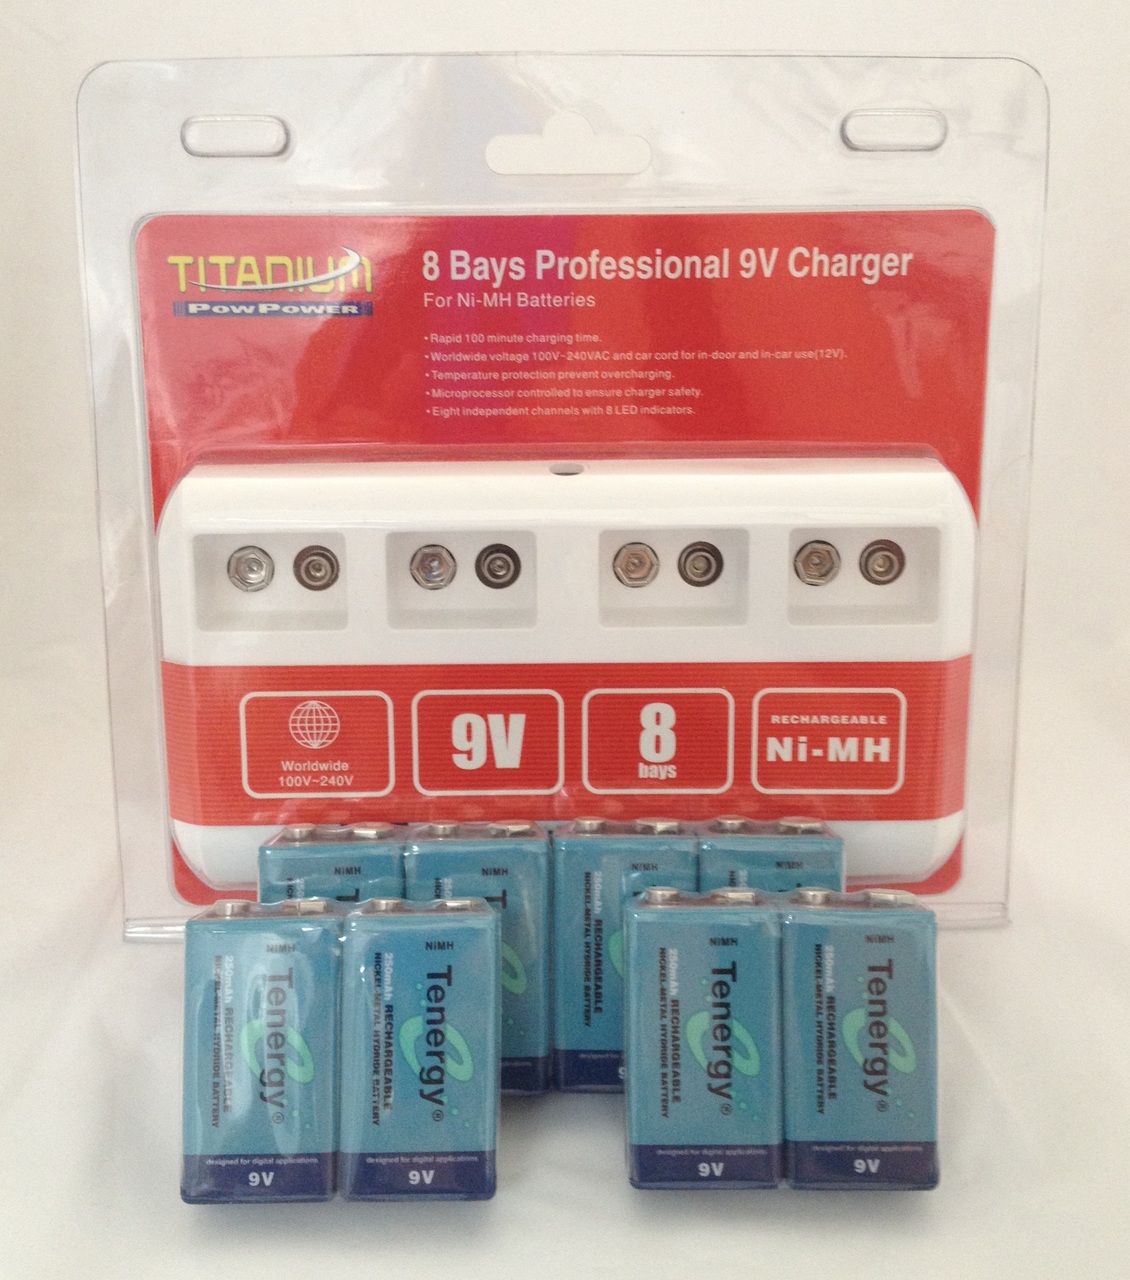 Titanium 8 Bay Professional 9V Charger For NiMH Batteries With 8 Tenergy 9V 250mah NiMB Batteries + FREE SHIPPING!